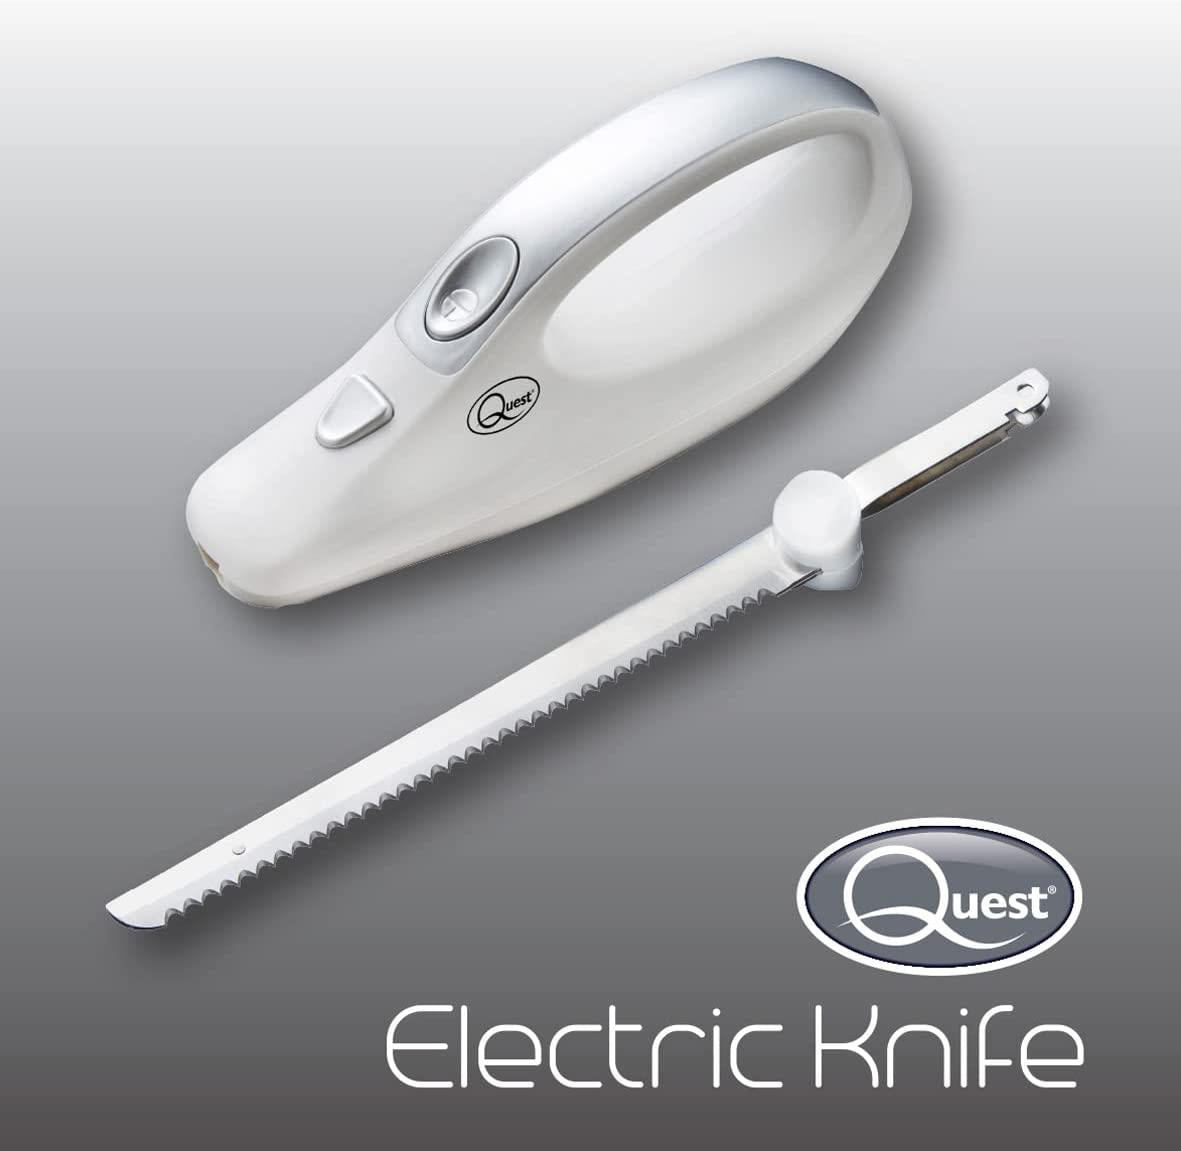 Quest Electric Knife White (Carton of 8)